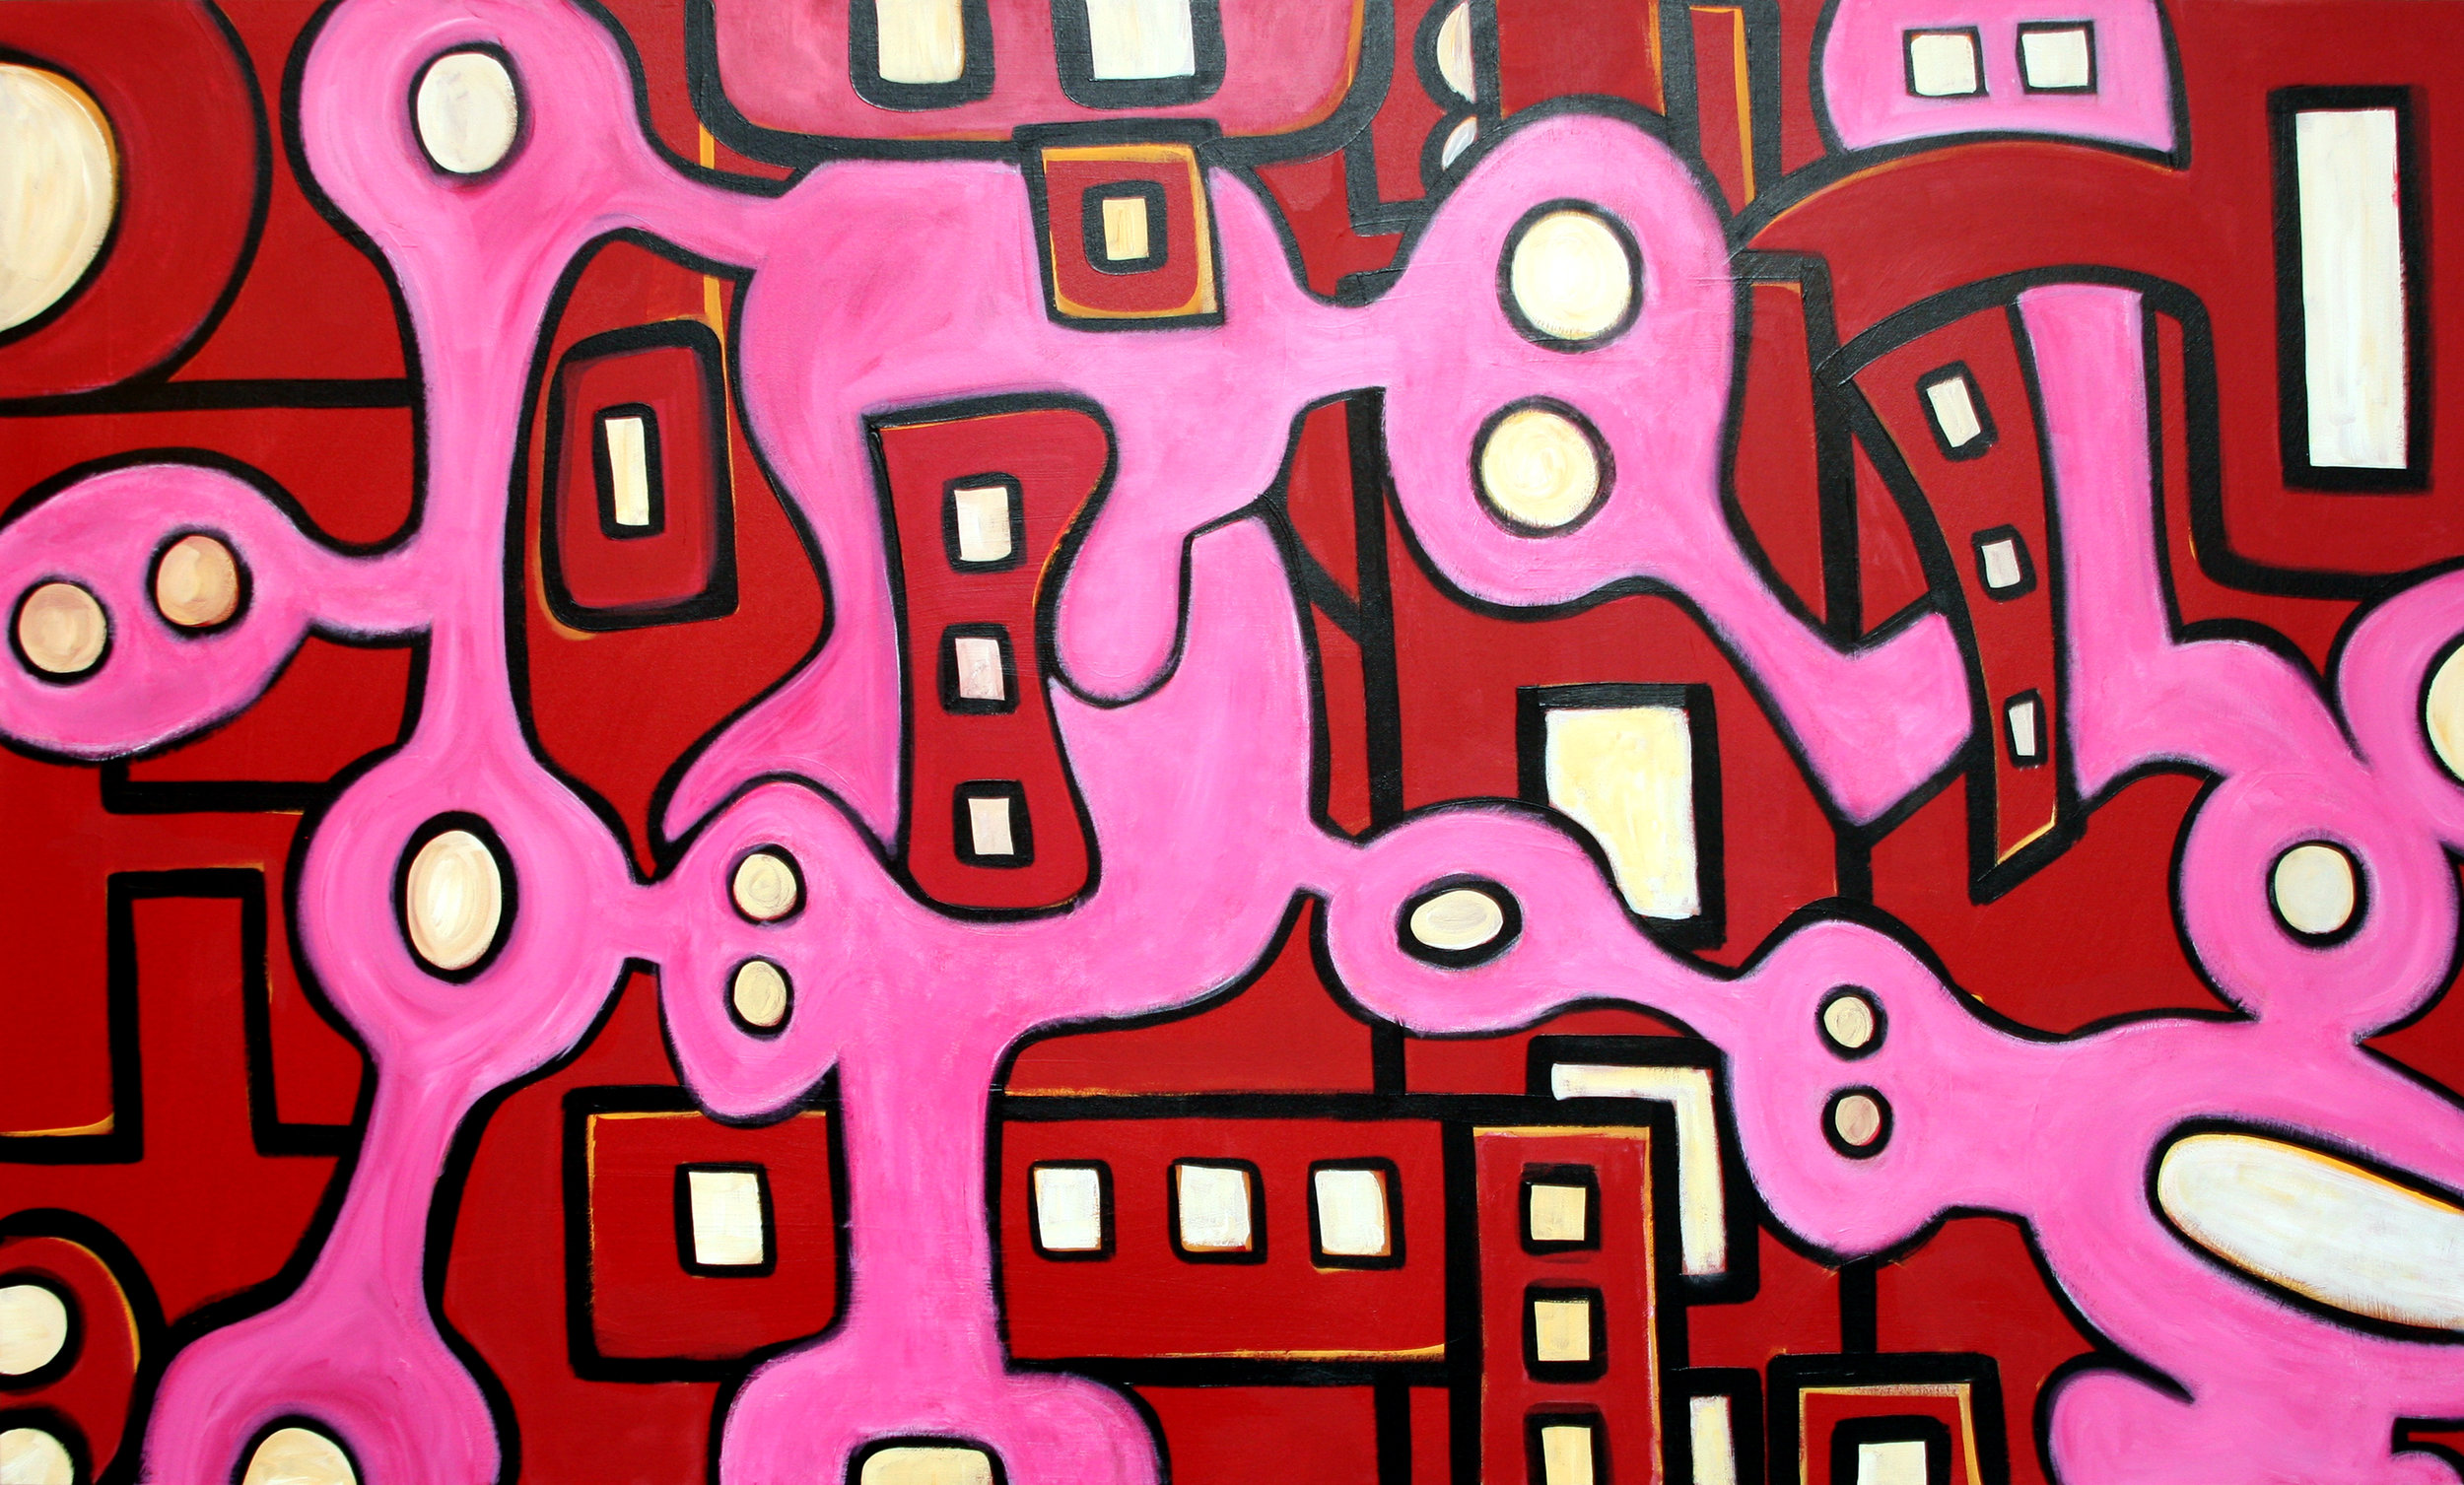 Inertia in Motion in Red and Pink, 2003